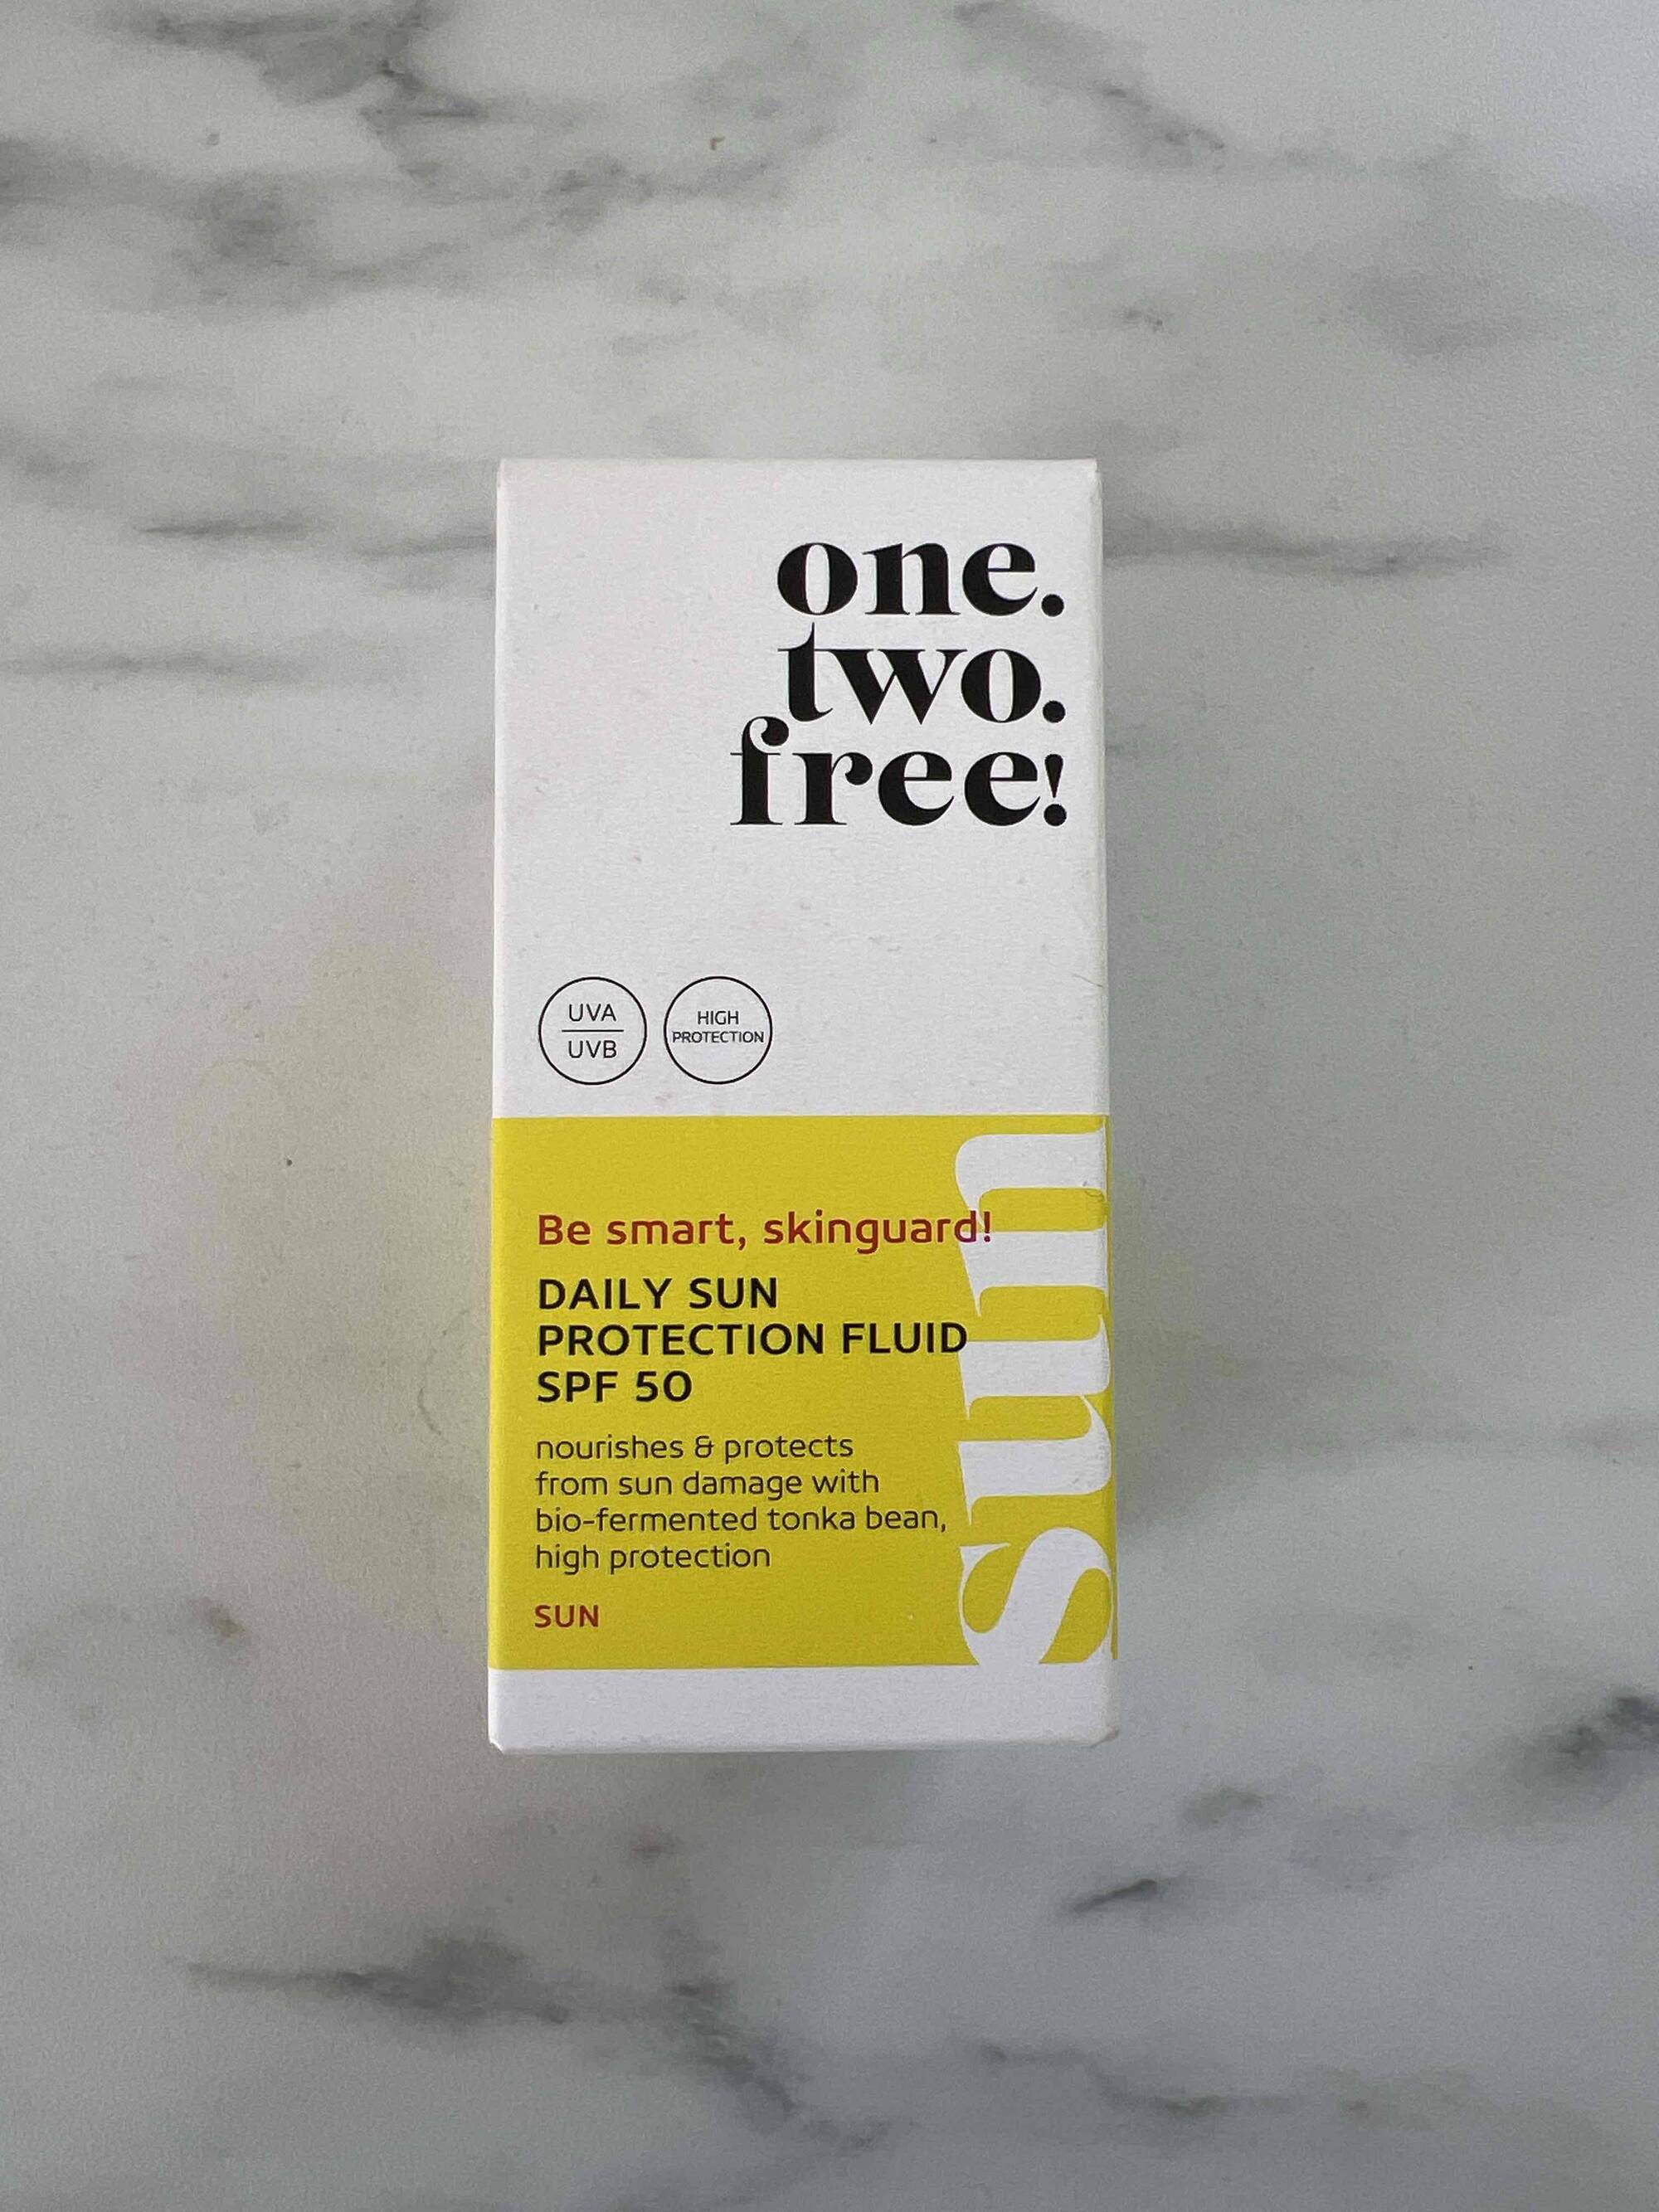 ONE.TWO.FREE! - Daily sun protection fluid SPF 50